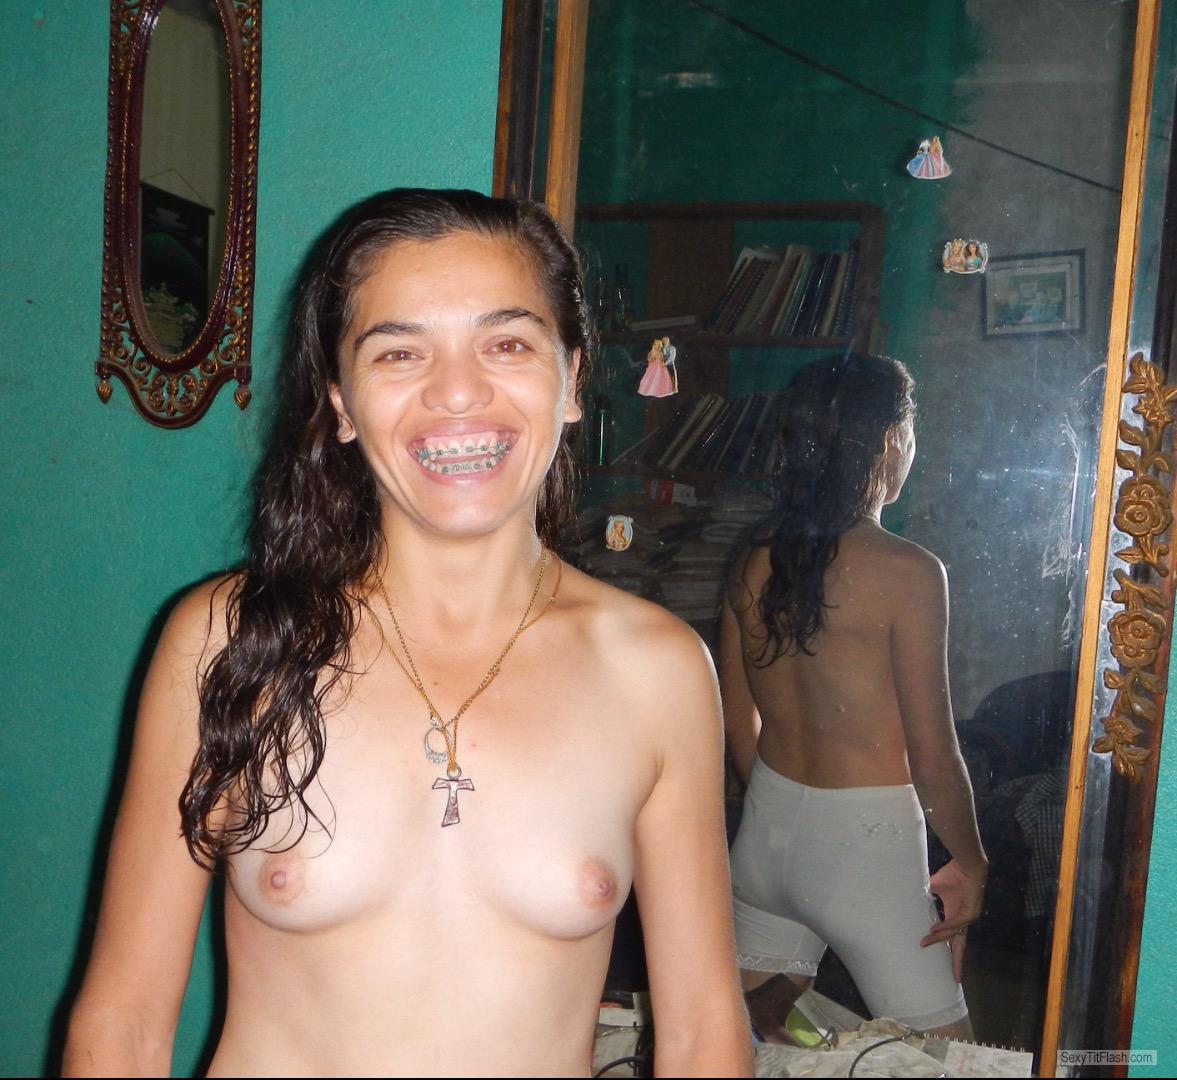 Tit Flash: My Small Tits (Selfie) - Topless Real Ex Nun from Ecuador